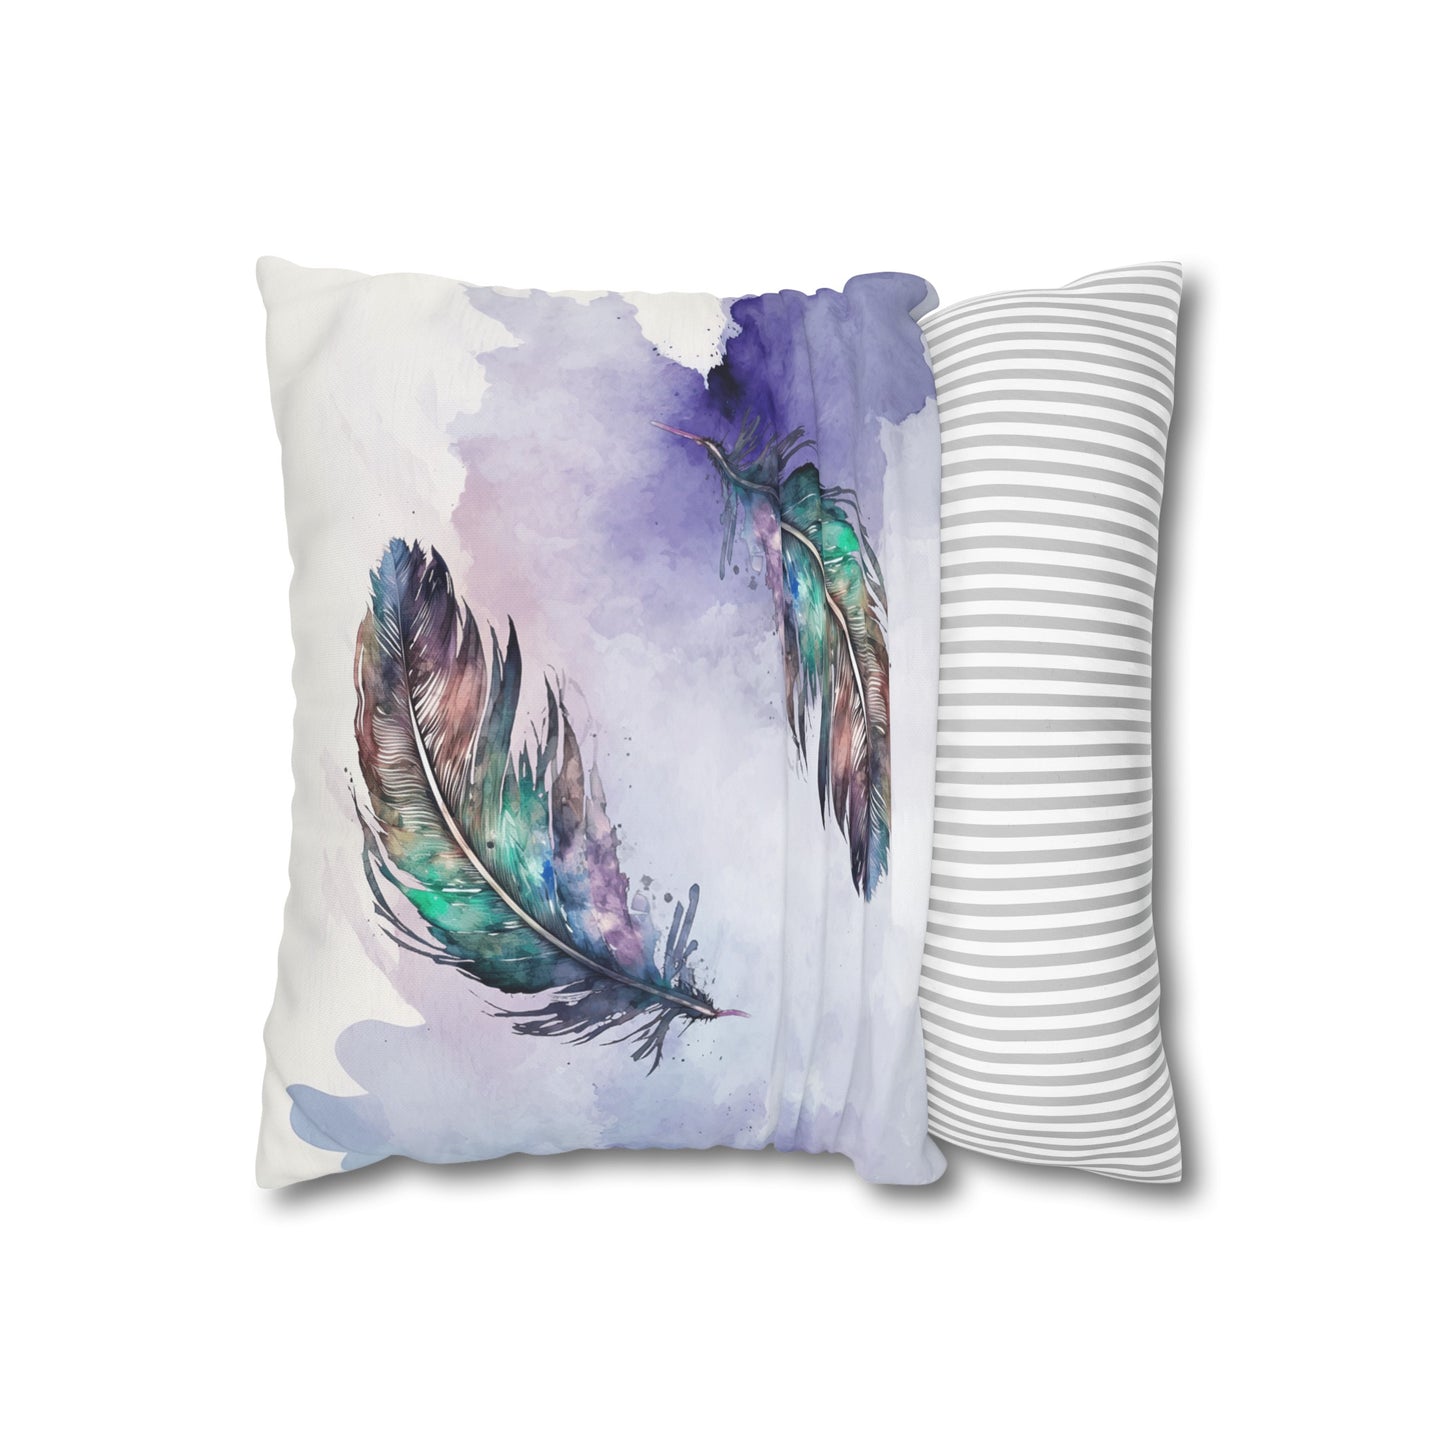 Feather On The Wind #8 Canvas Cushion Cover